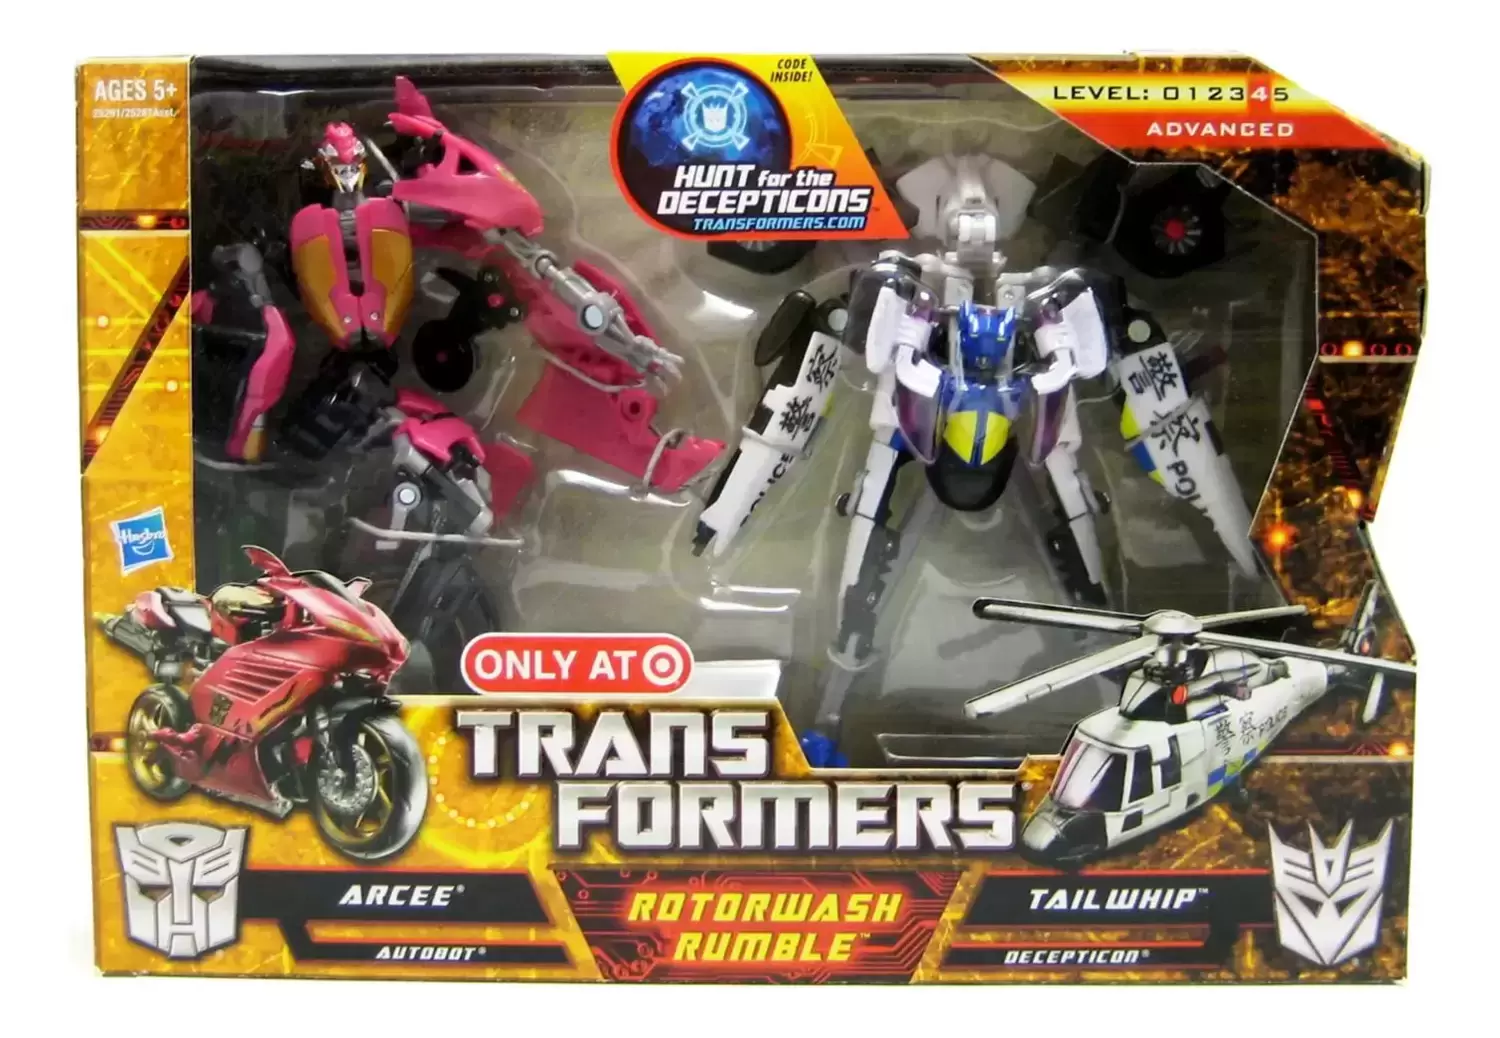 Transformers Hunt for the Decepticon - Versus Pack: Rotorwash Rumble (Arcee vs Tailwhip)